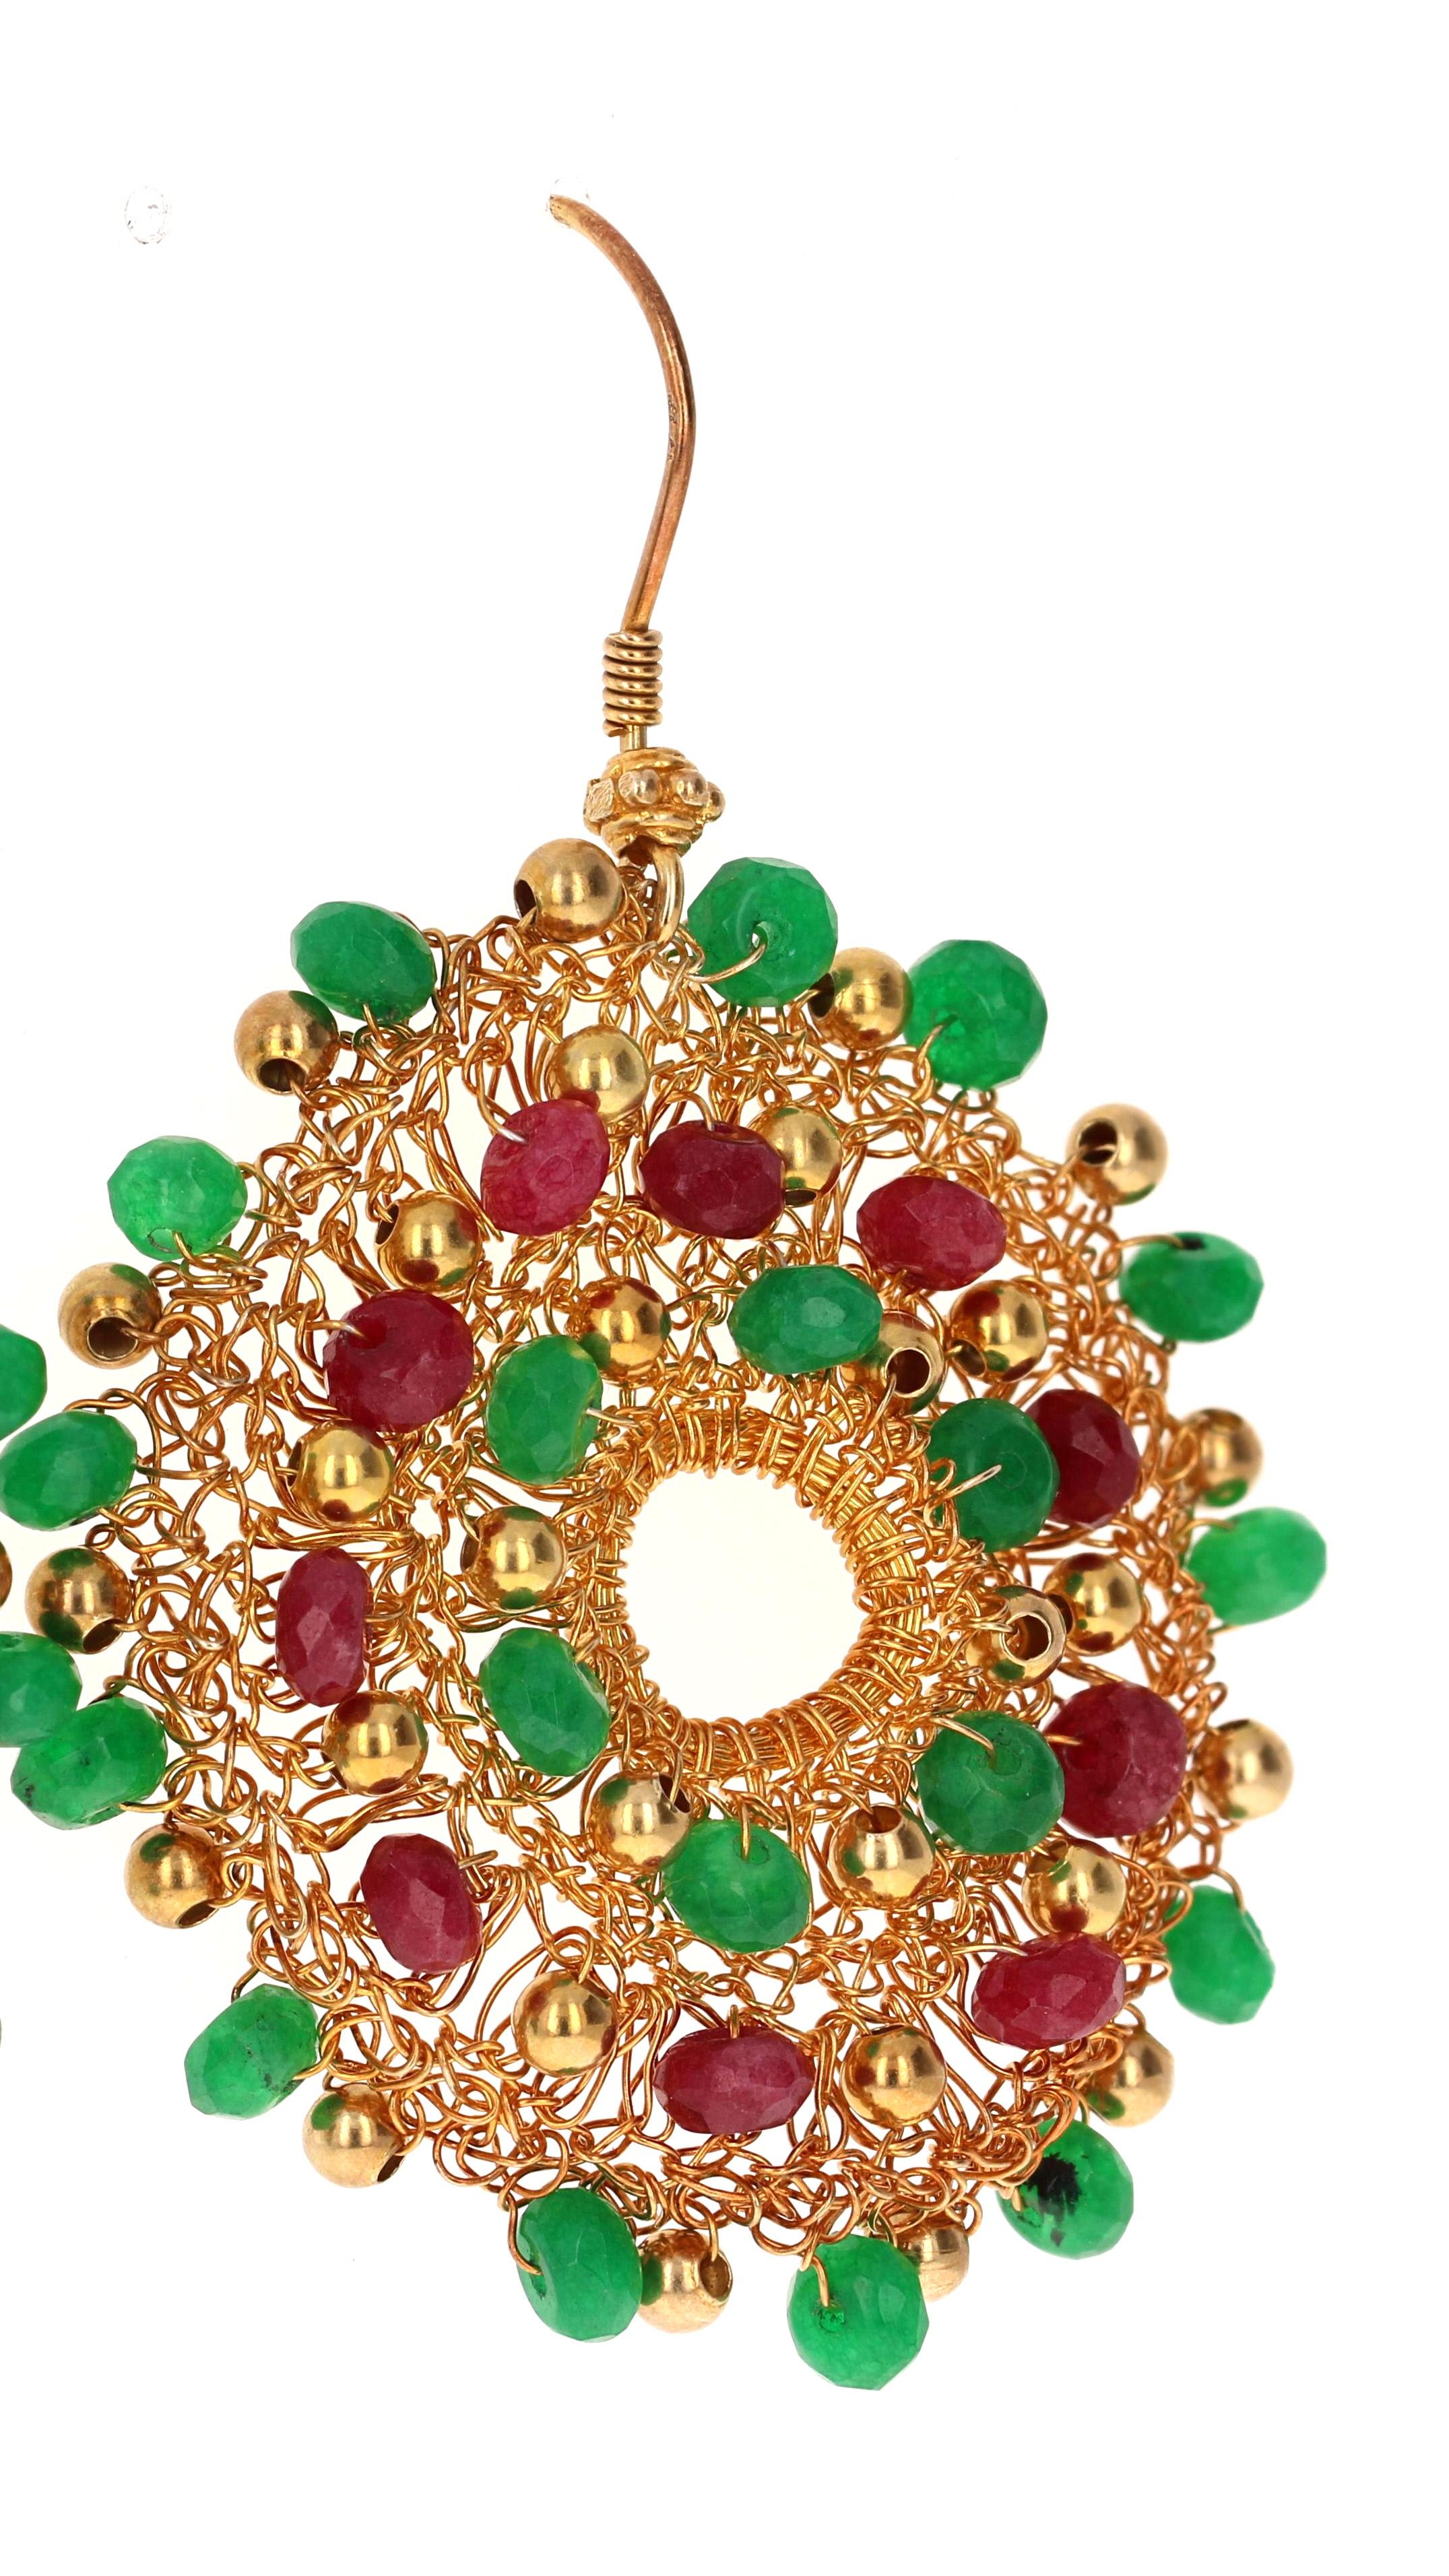 Stunning Emerald, Ruby Earrings - 925 Sterling Silver & 24Kt Gold Plated
Length and Width of Earrings is 2 inches
Turkish Design - Hand crafted in Turkey
One of a kind design
